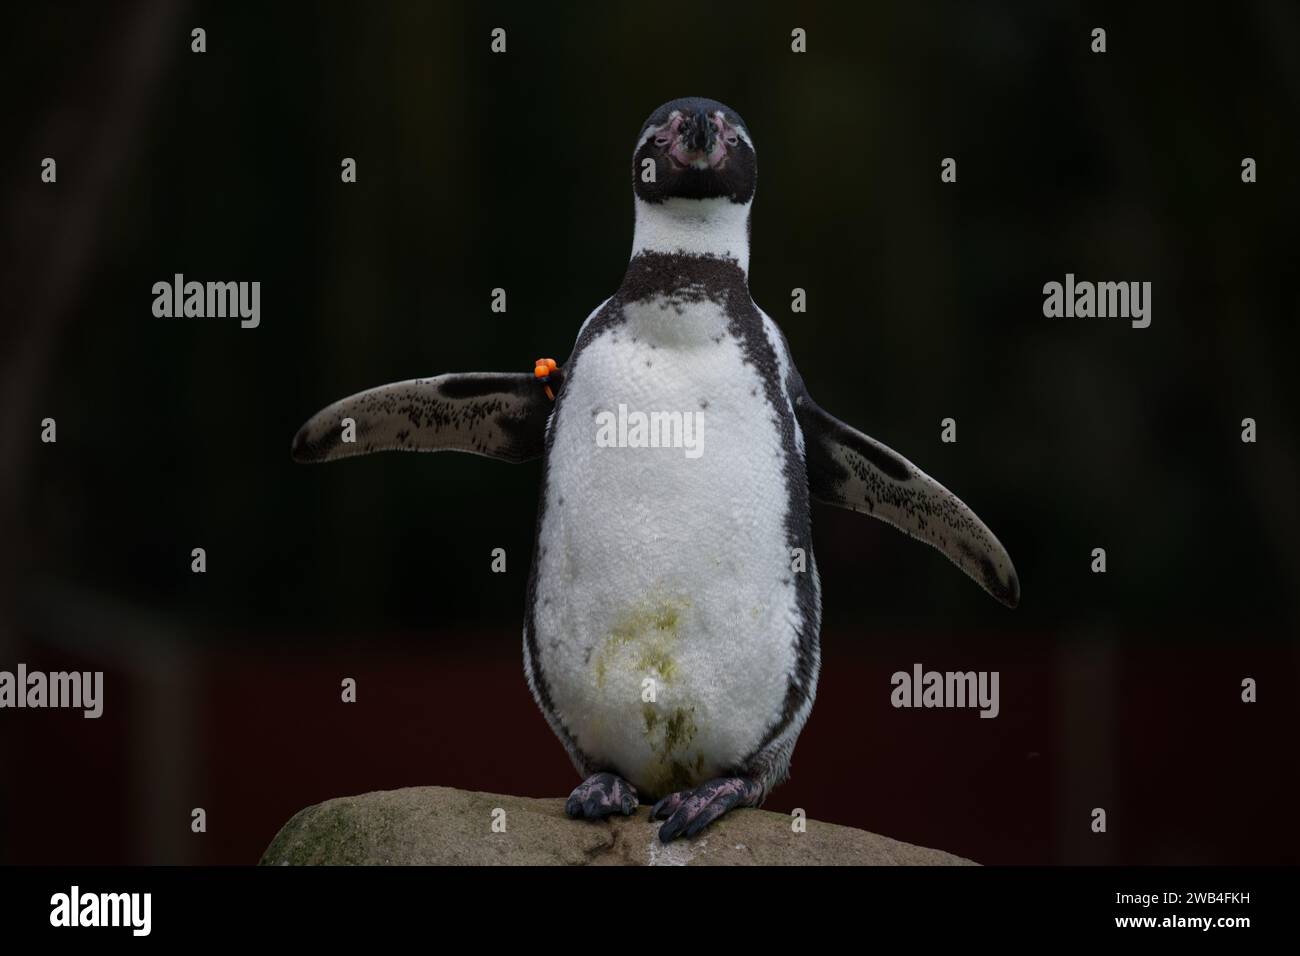 A Humboldt penguin stretching it's wings while looking at the camera at London Zoo Stock Photo